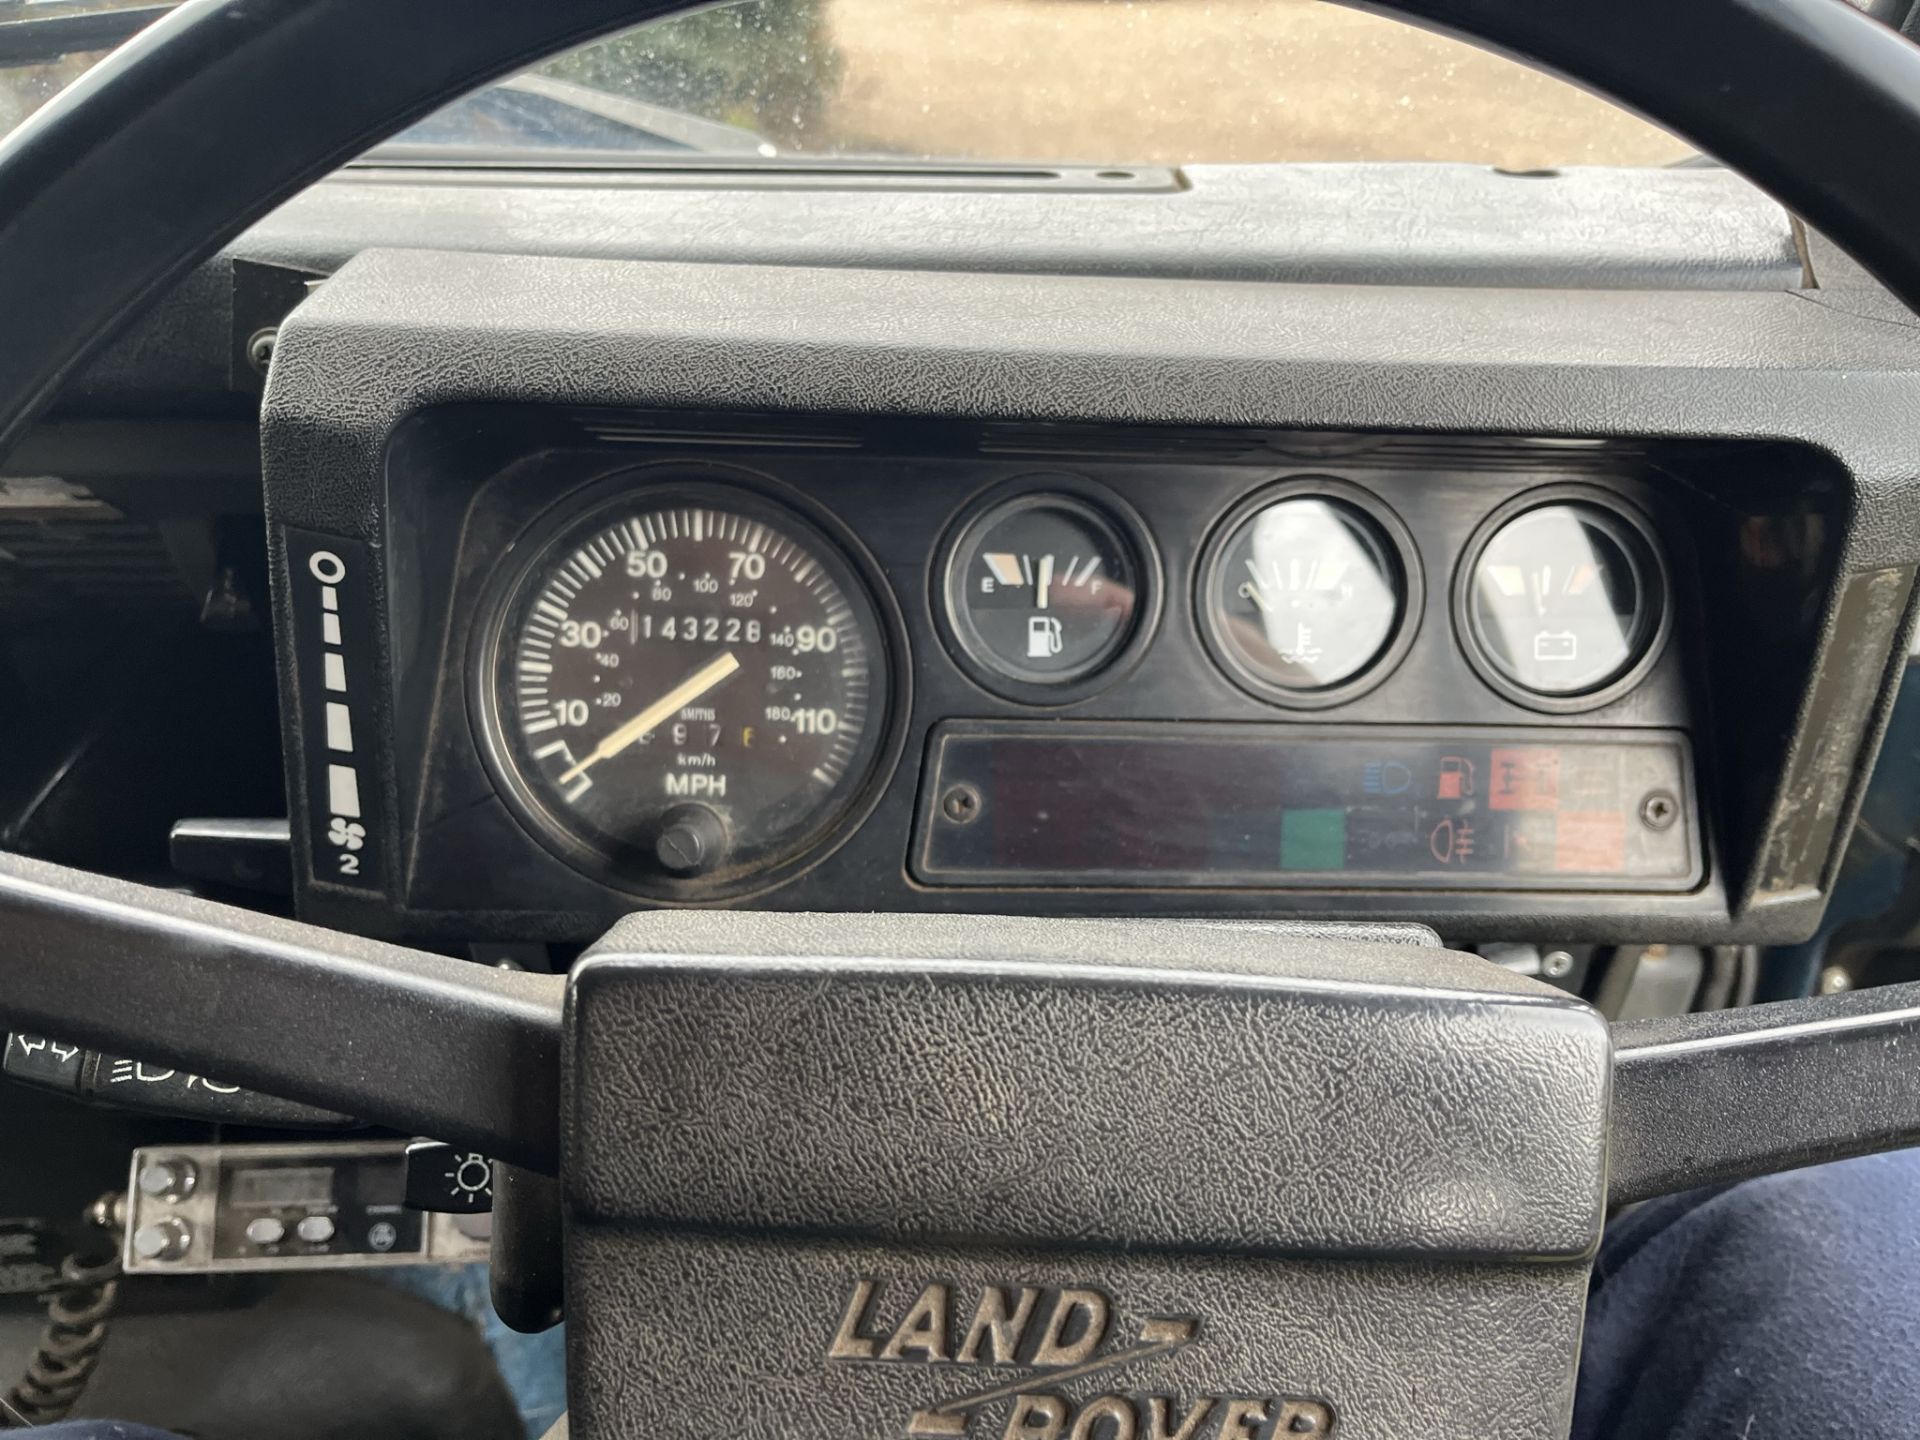 1992 Land Rover Defender, SWB pickup, blue complete with spare wheels and a heavy duty winch in - Image 10 of 12